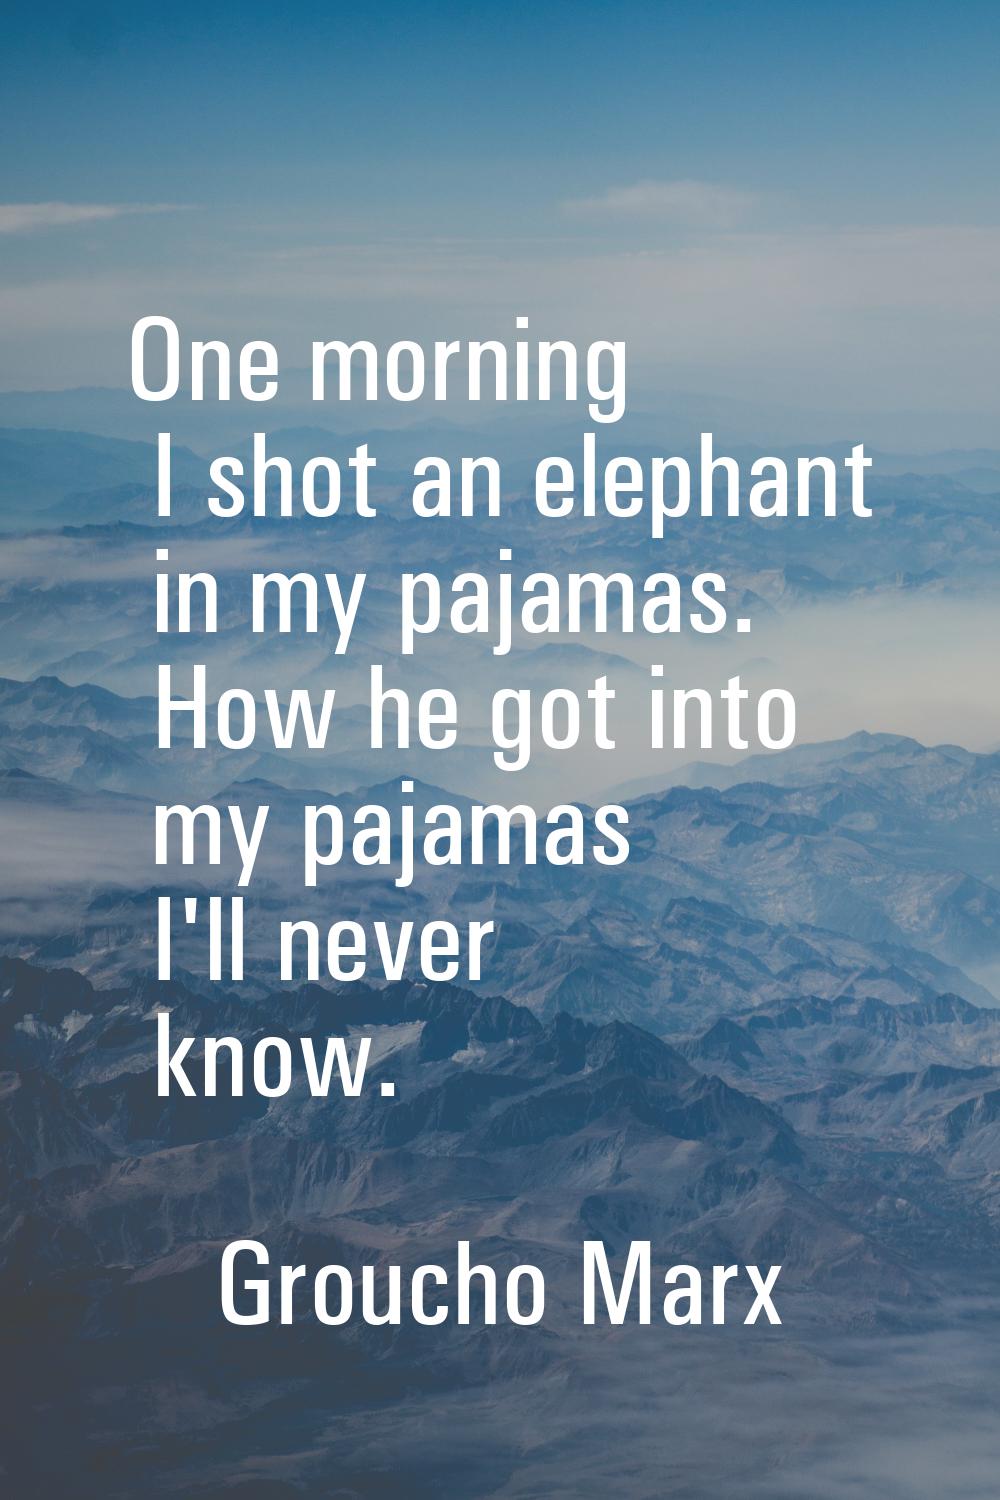 One morning I shot an elephant in my pajamas. How he got into my pajamas I'll never know.